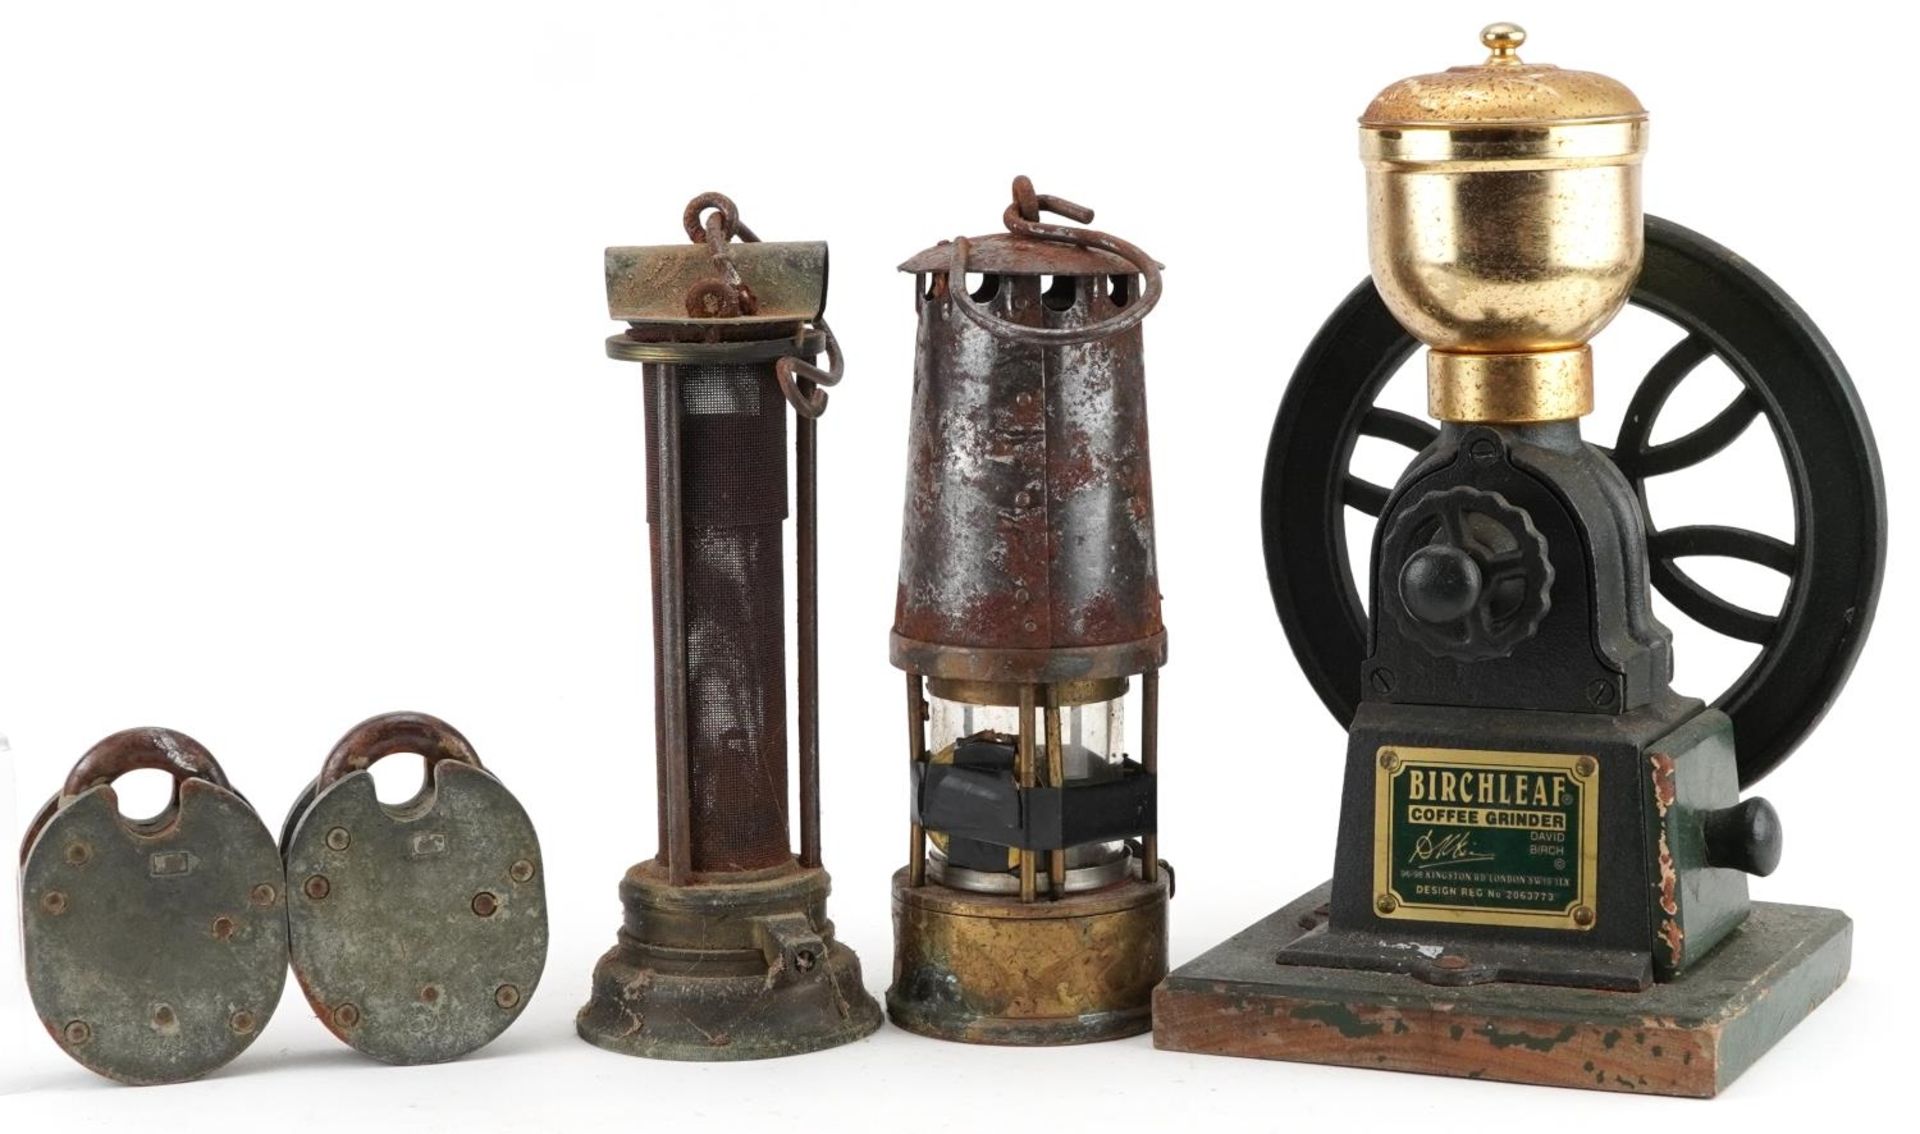 Two early 20th century miner's lamps and a Birchleaf coffee grinder, the largest 31cm high - Image 5 of 6